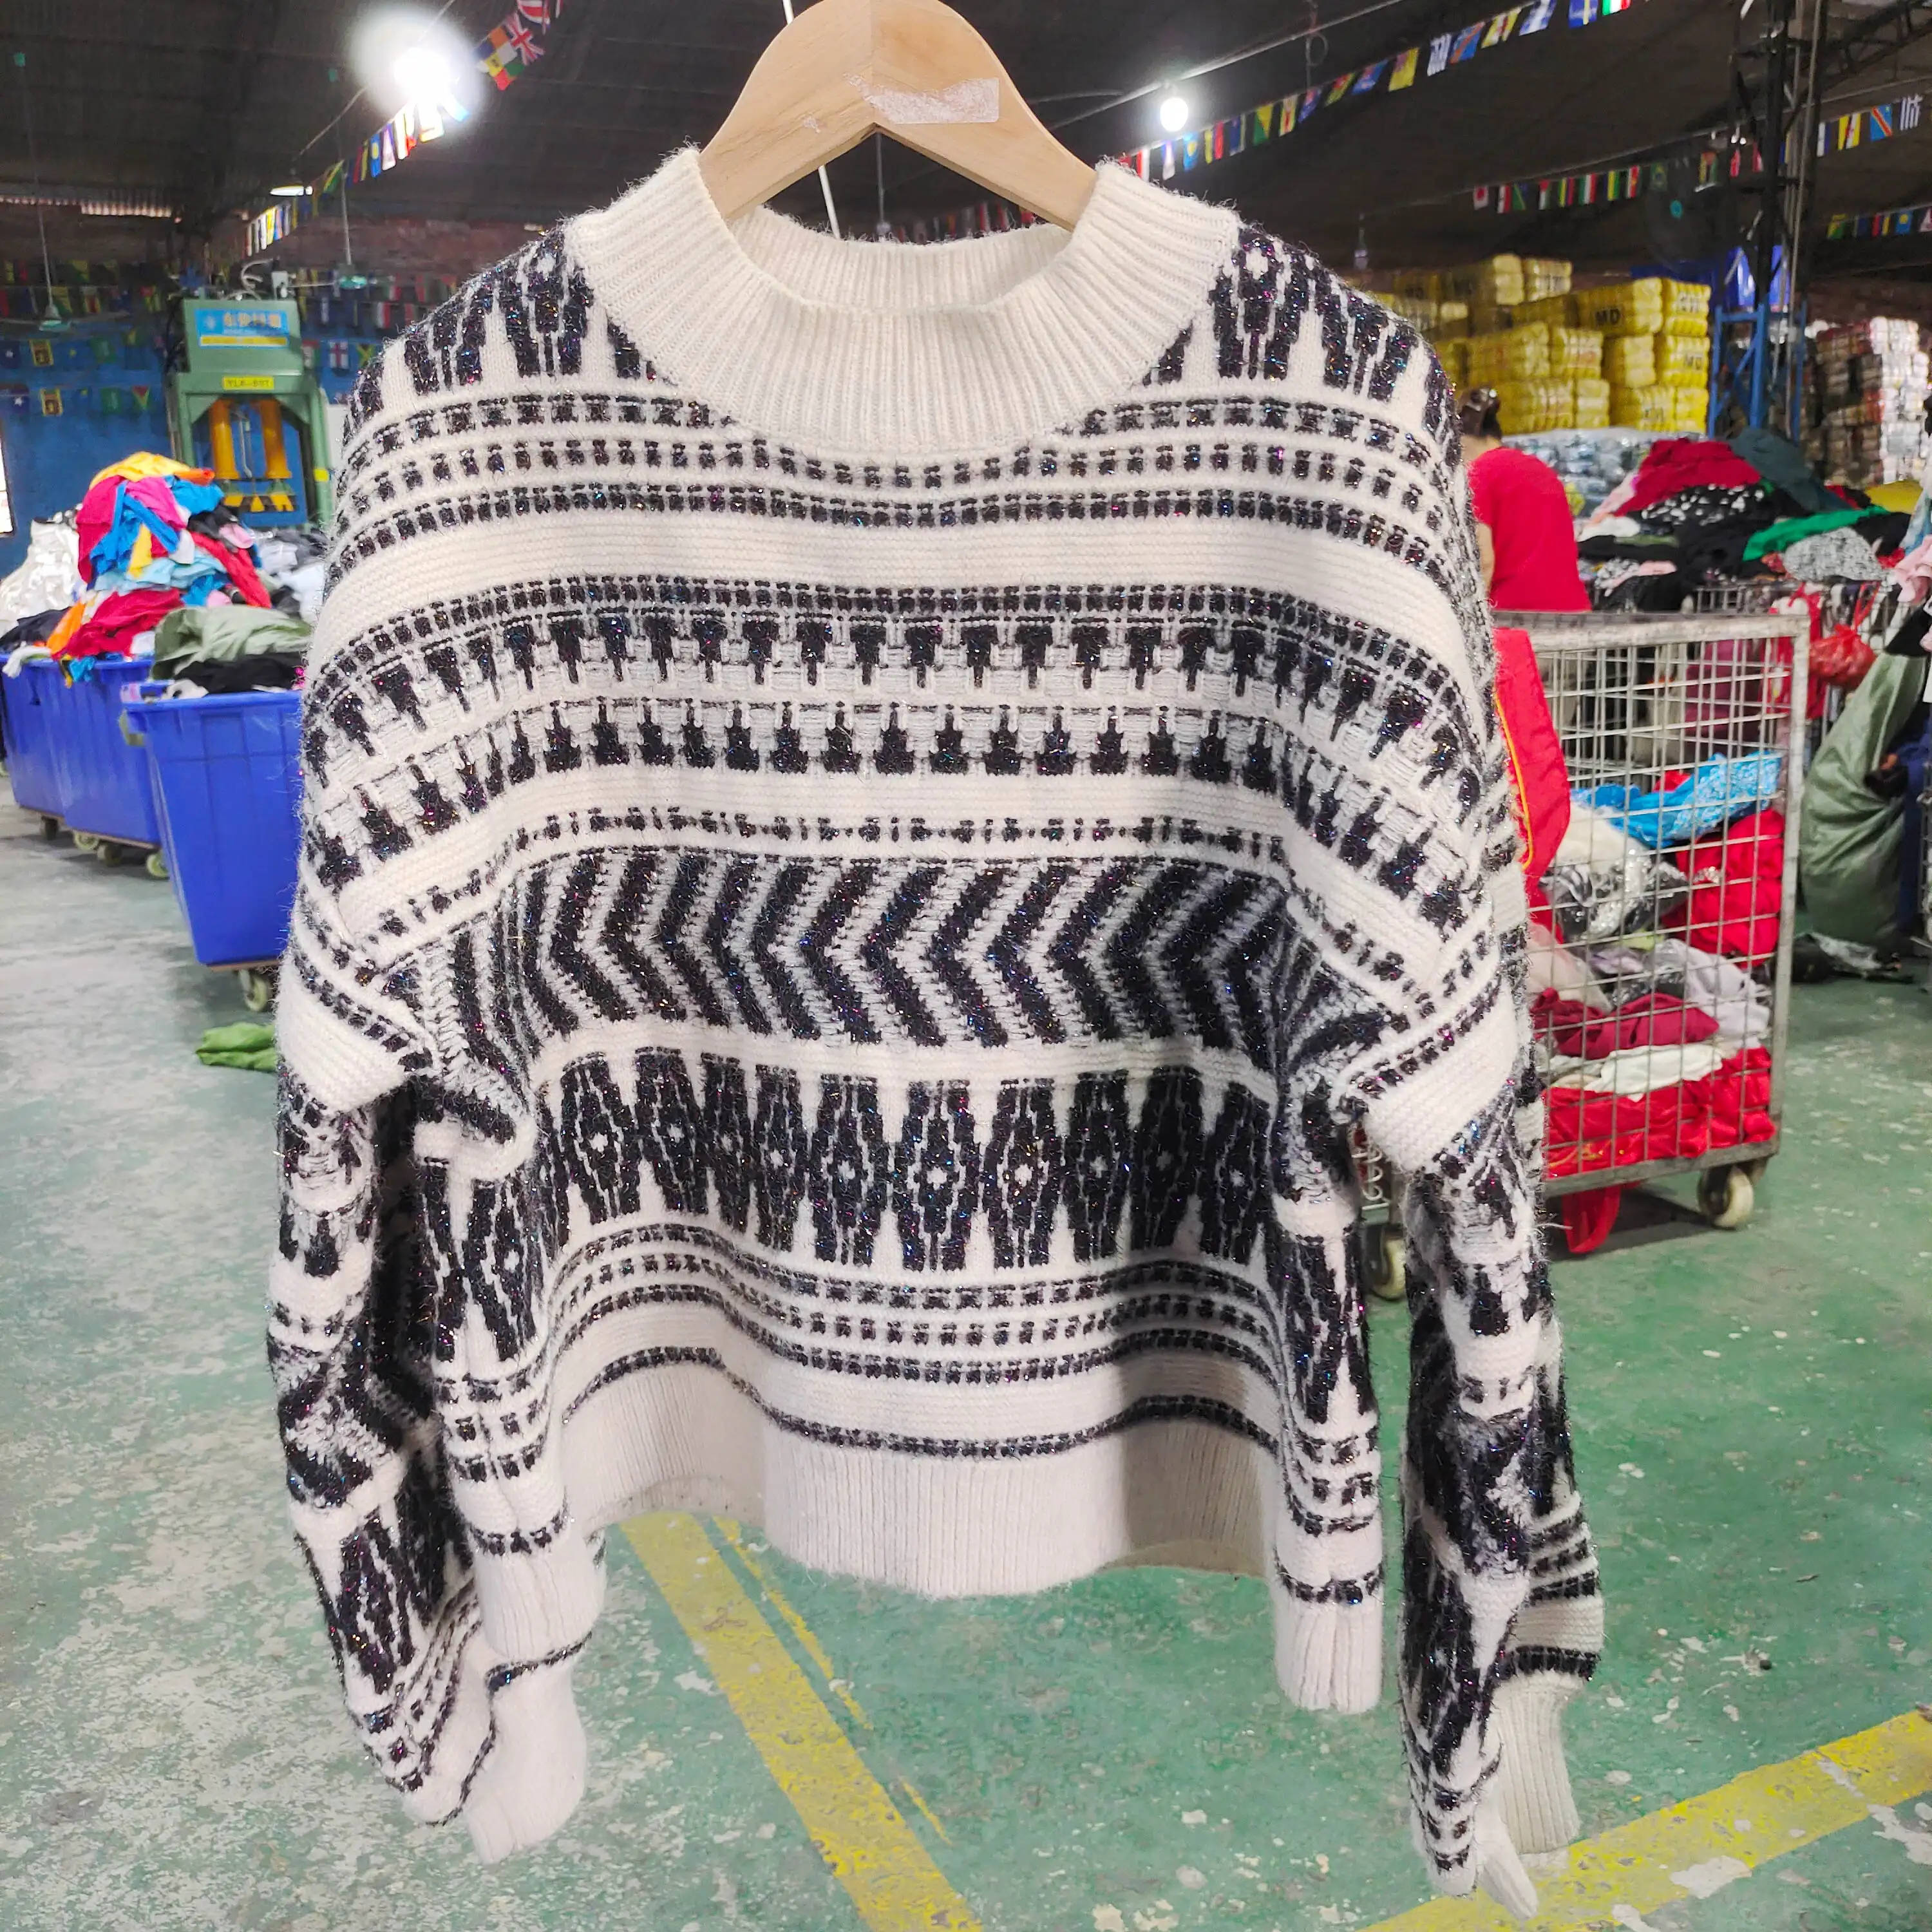 Alibaba-Online-Shopping-Website bales used wholesale used sweaters second hand clothing old used cashmere sweaters